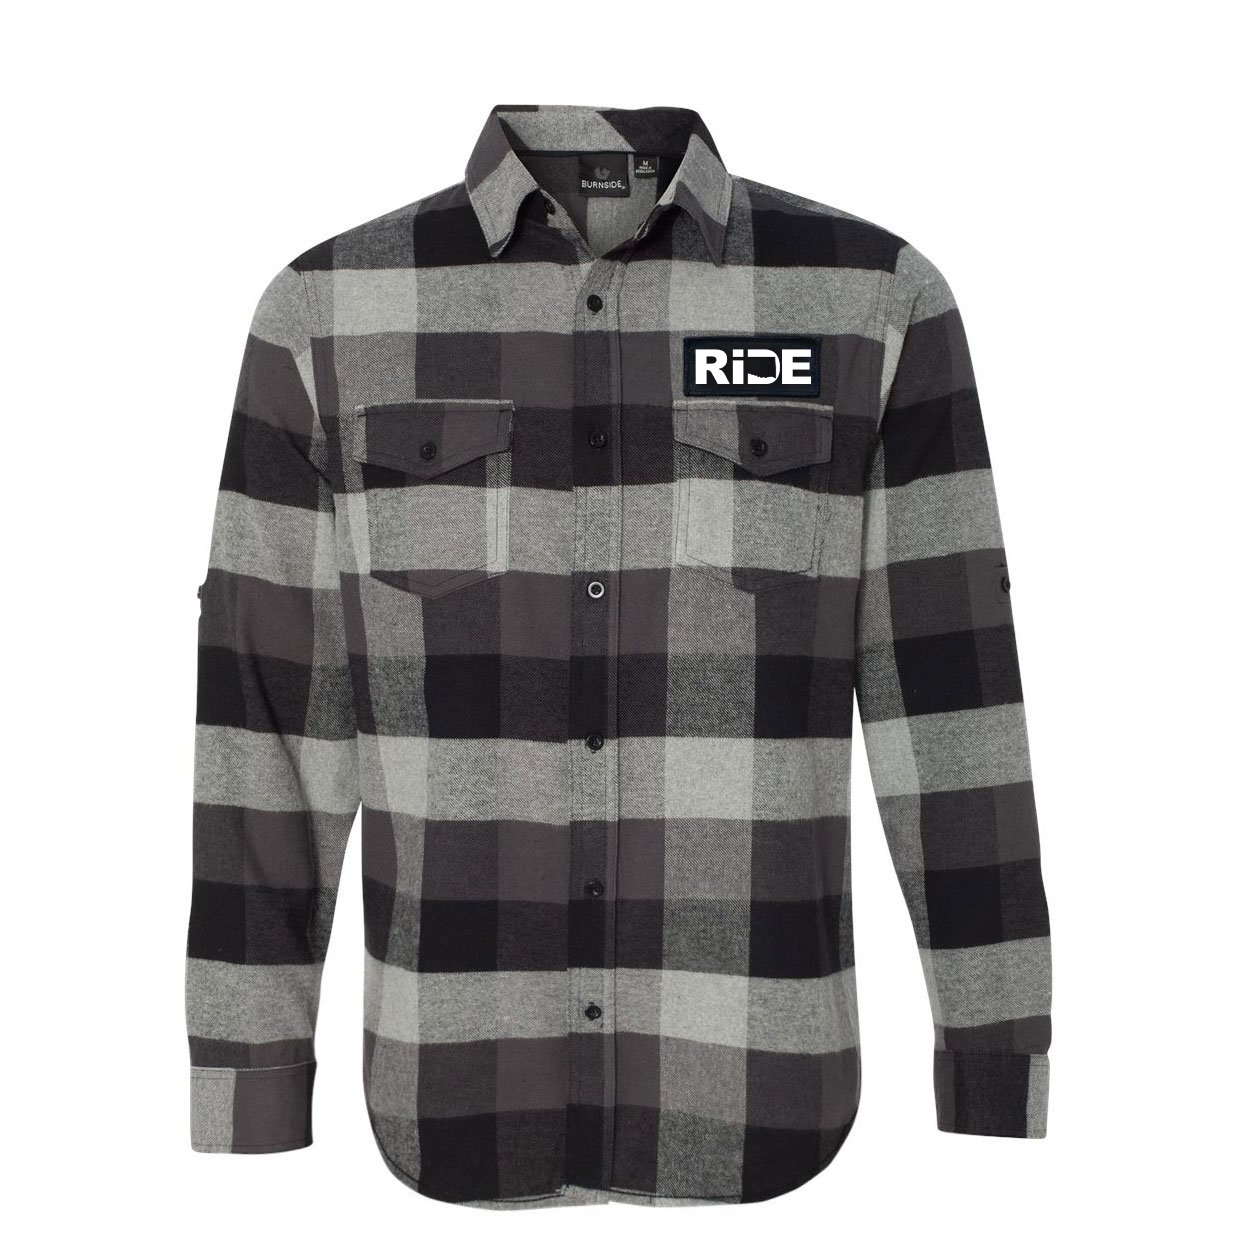 Ride Oklahoma Classic Unisex Long Sleeve Woven Patch Flannel Shirt Black/Gray (White Logo)